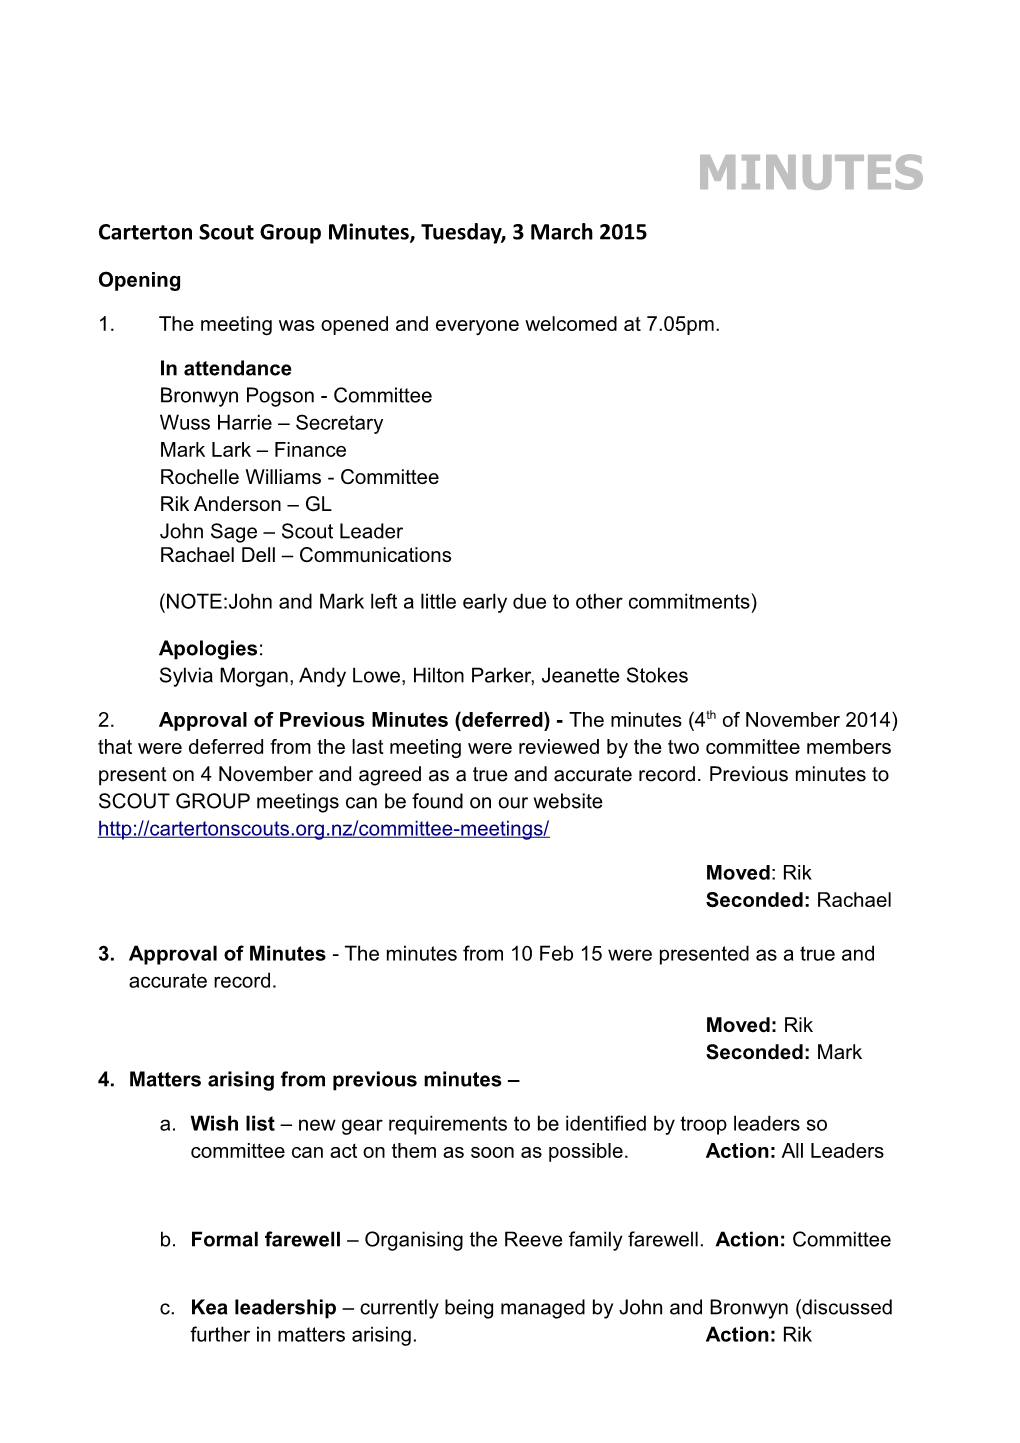 Carterton Scout Group Minutes, Tuesday, 3March 2015